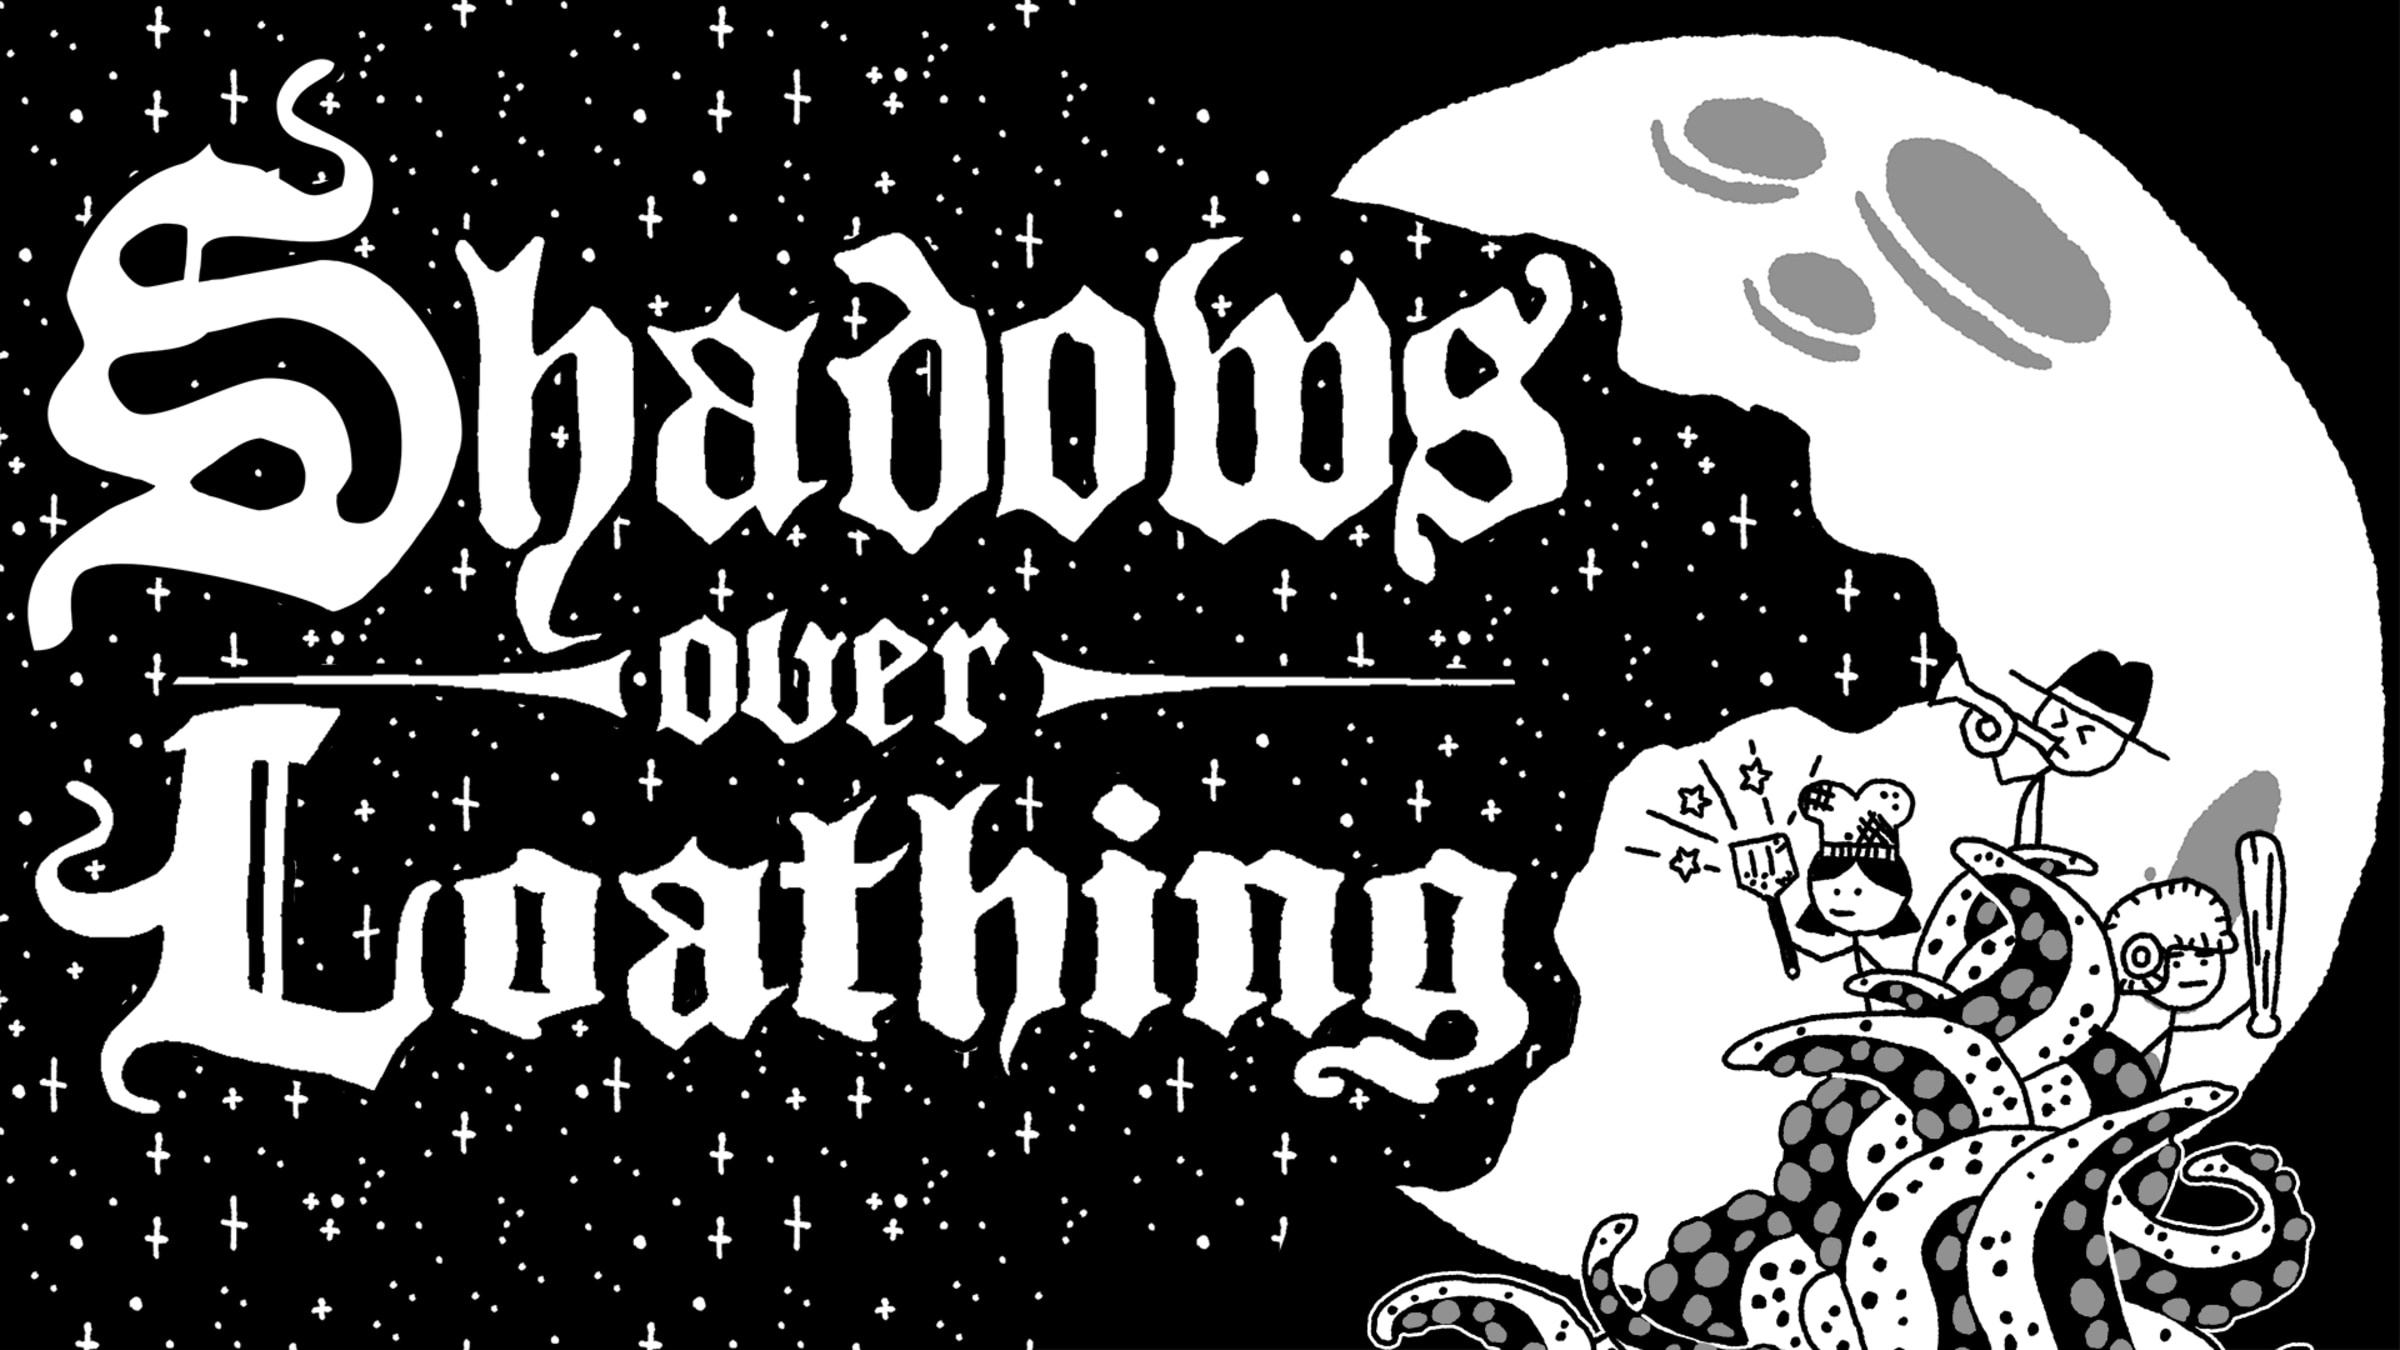 Shadows Over Loathing for Nintendo Switch Nintendo Official Site